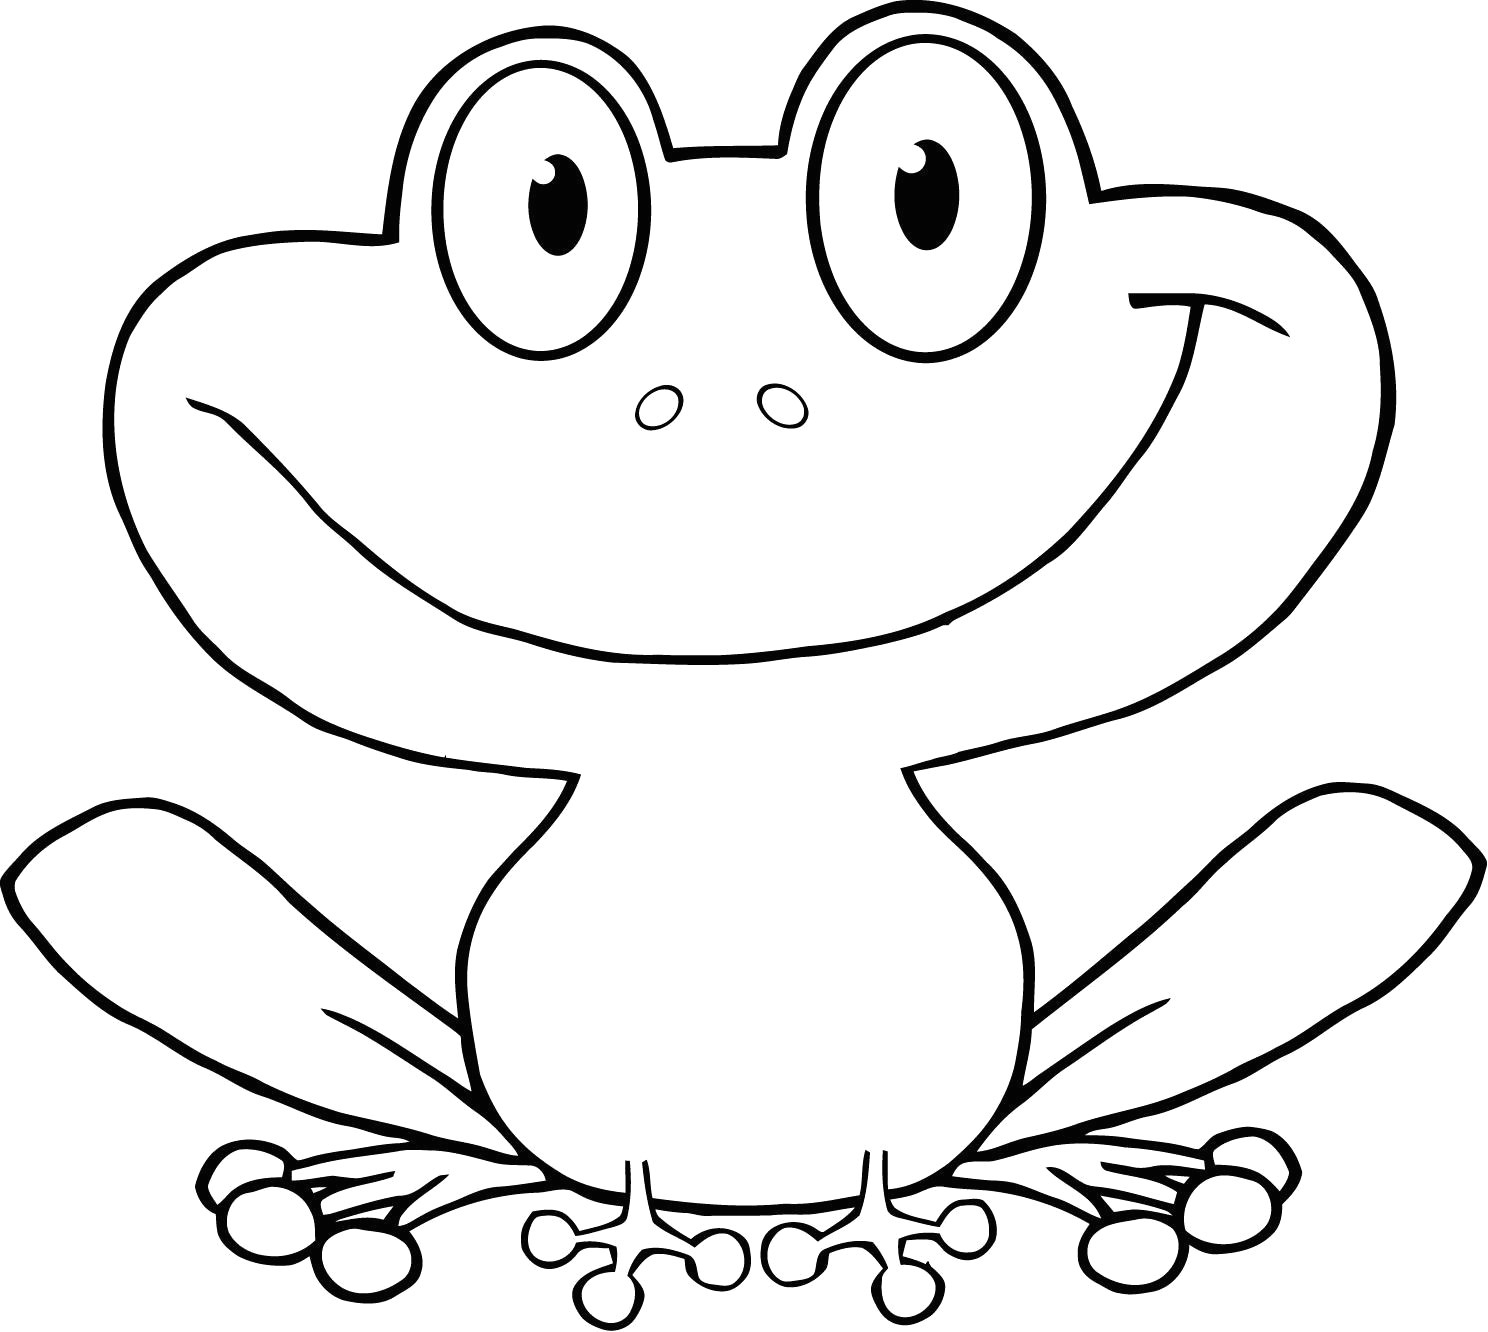 drawings cartoons new free frog coloring pages elegant frog colouring 0d free coloring ruva